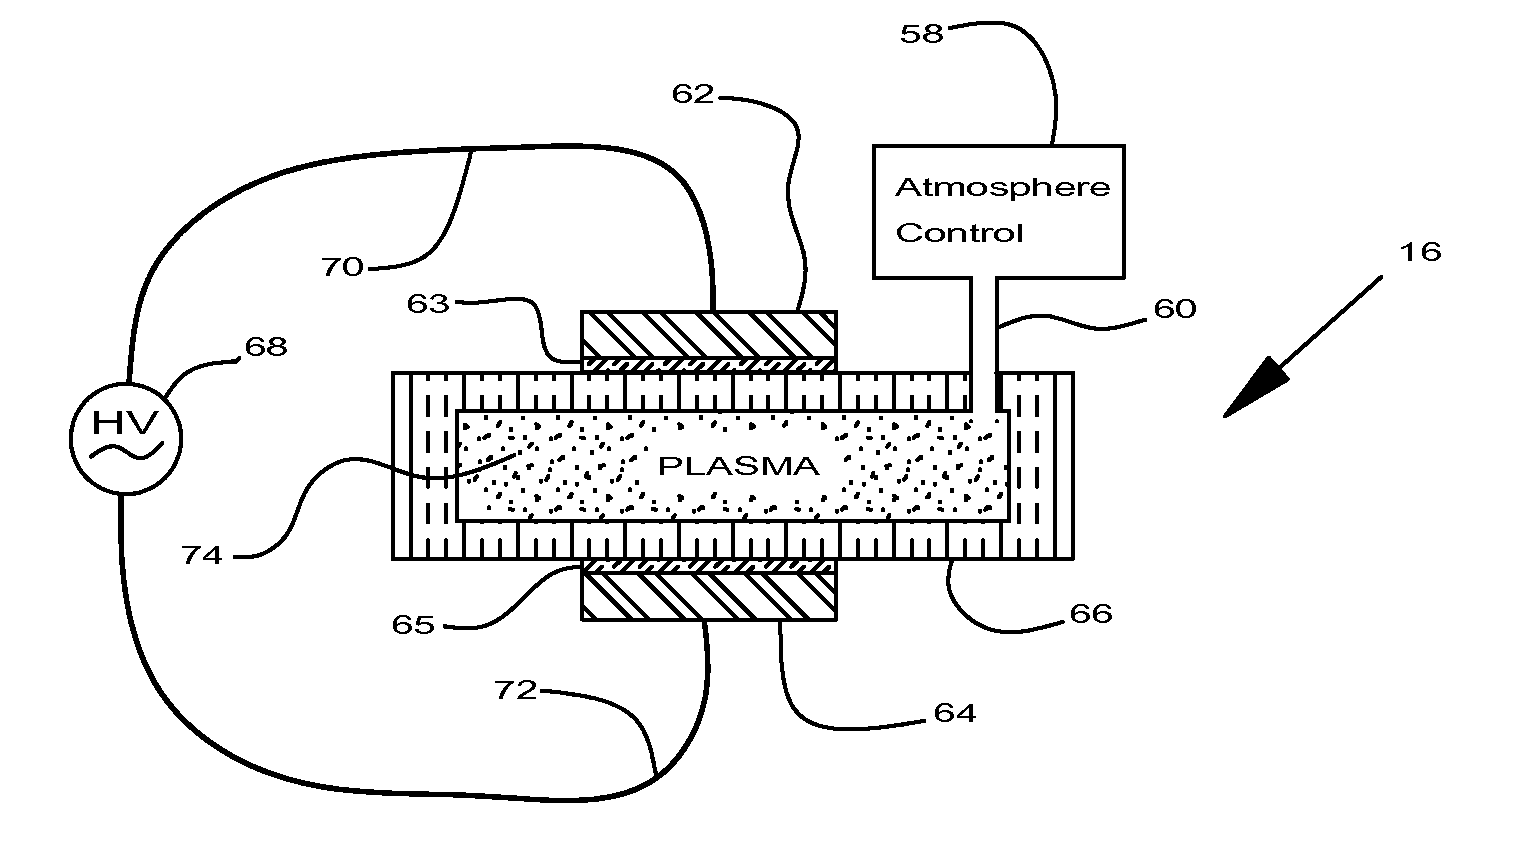 Dielectric plasma chamber apparatus and method with exterior electrodes